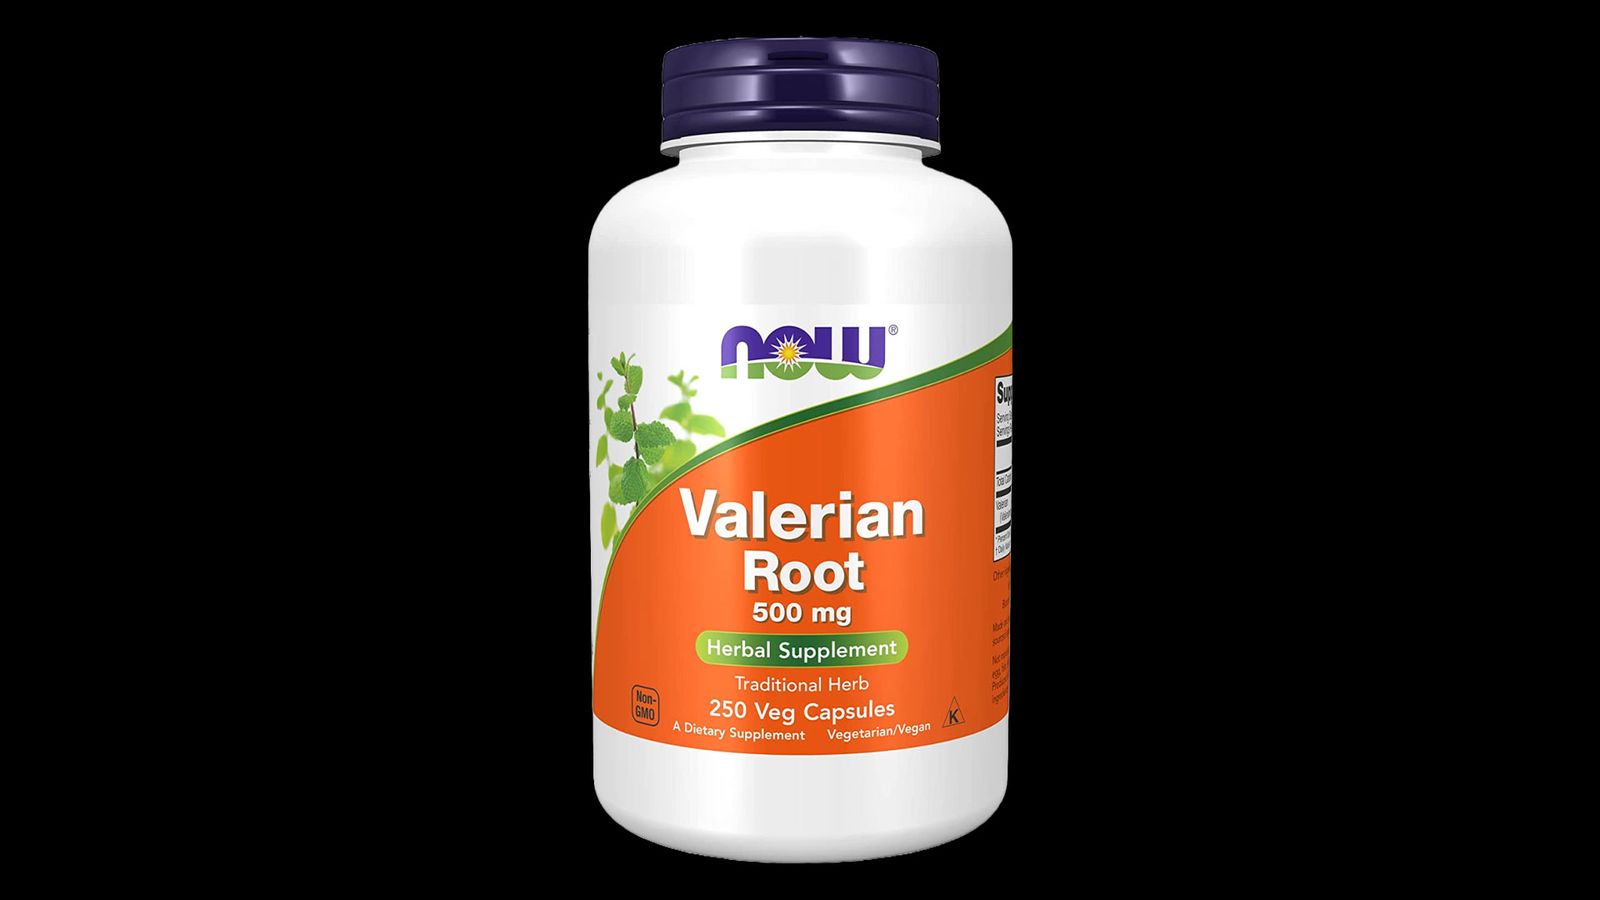 NOW Supplements Valerian Root Capsules product image of a white container with orange and green labelling.